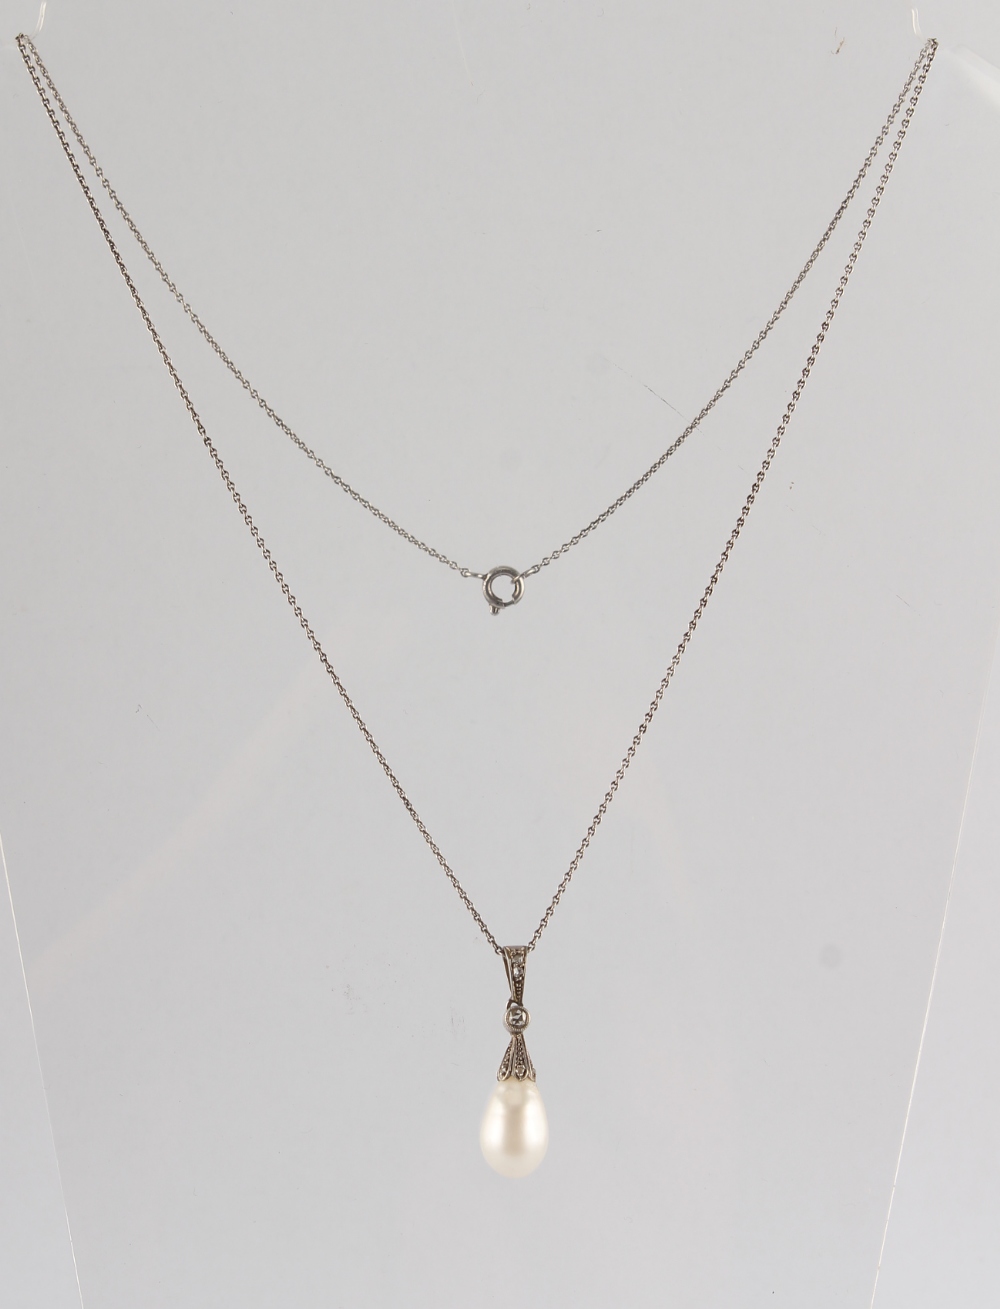 A large pearl & diamond pendant, the pear shaped pearl measuring approximately 13mm long (